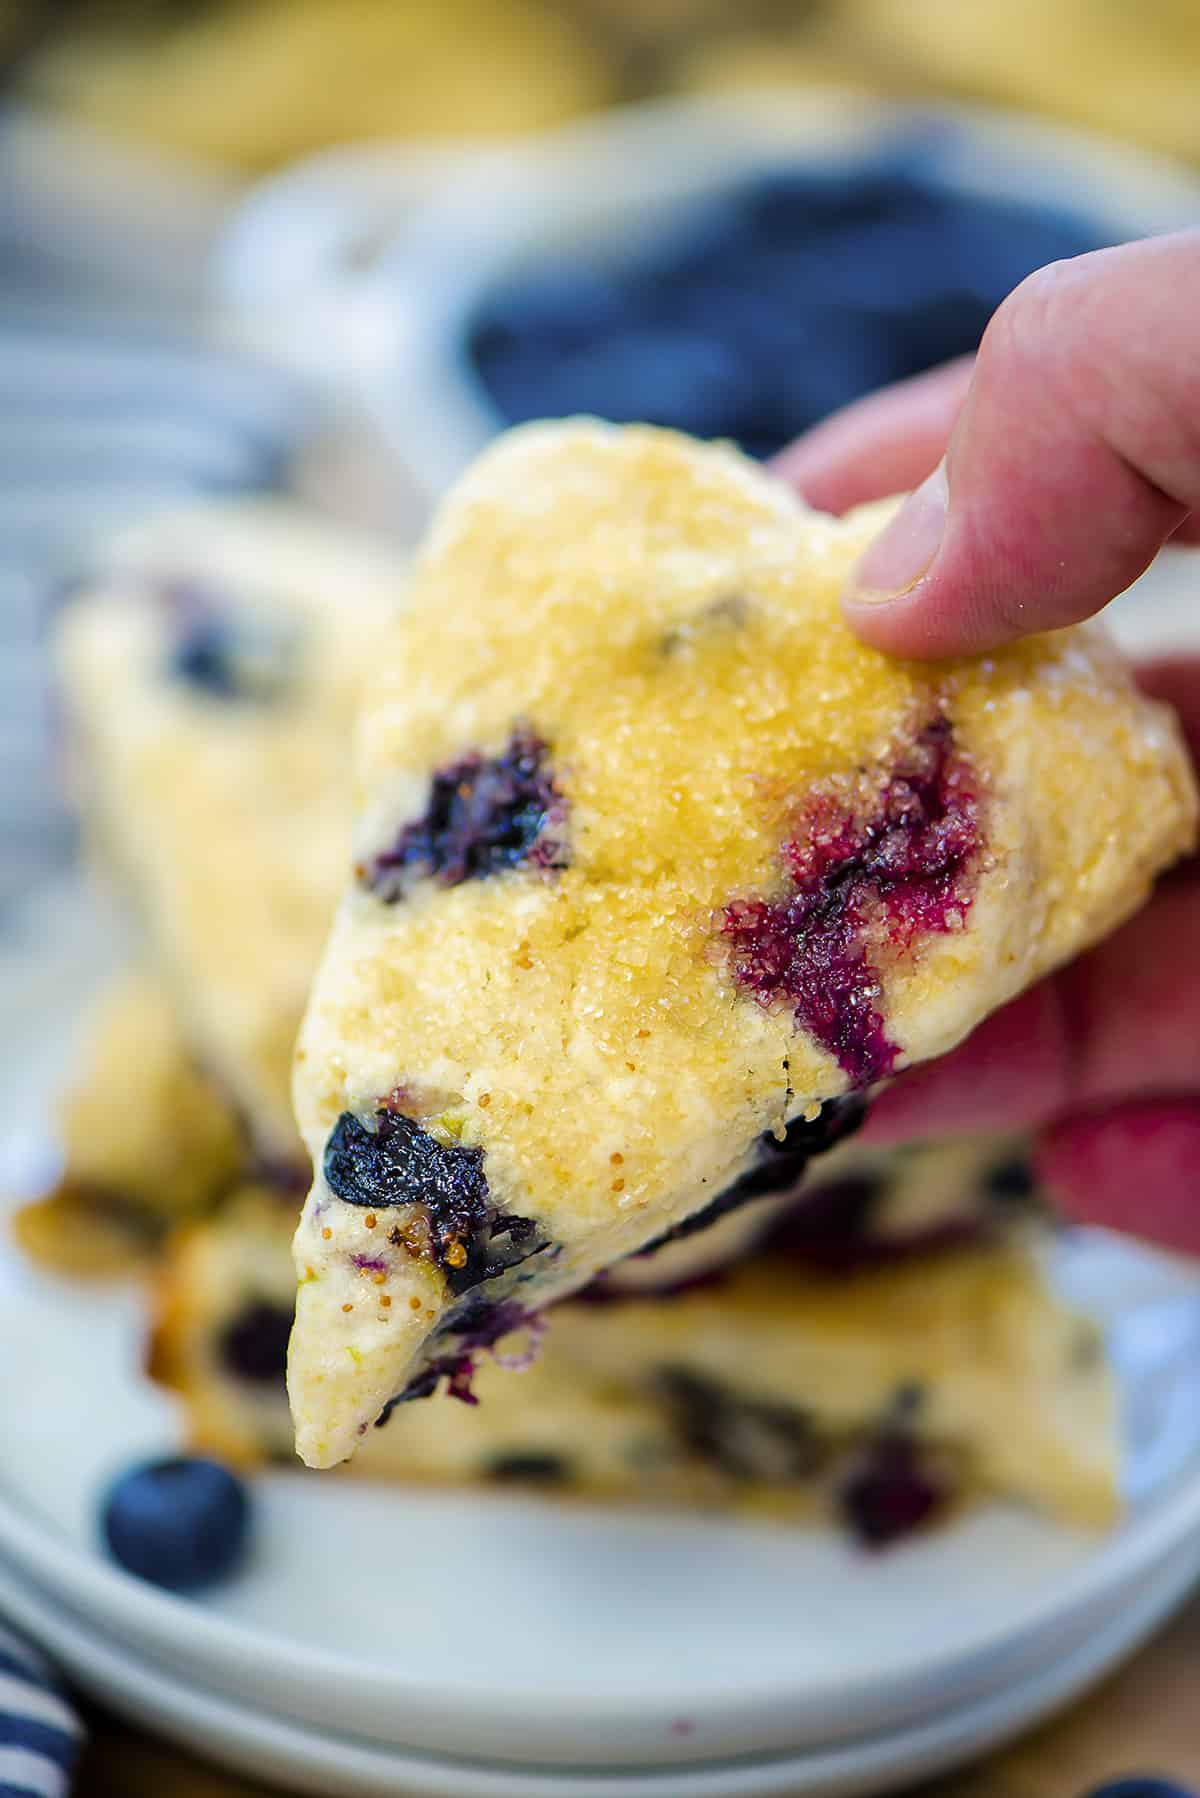 Hand holding a blueberry scone.